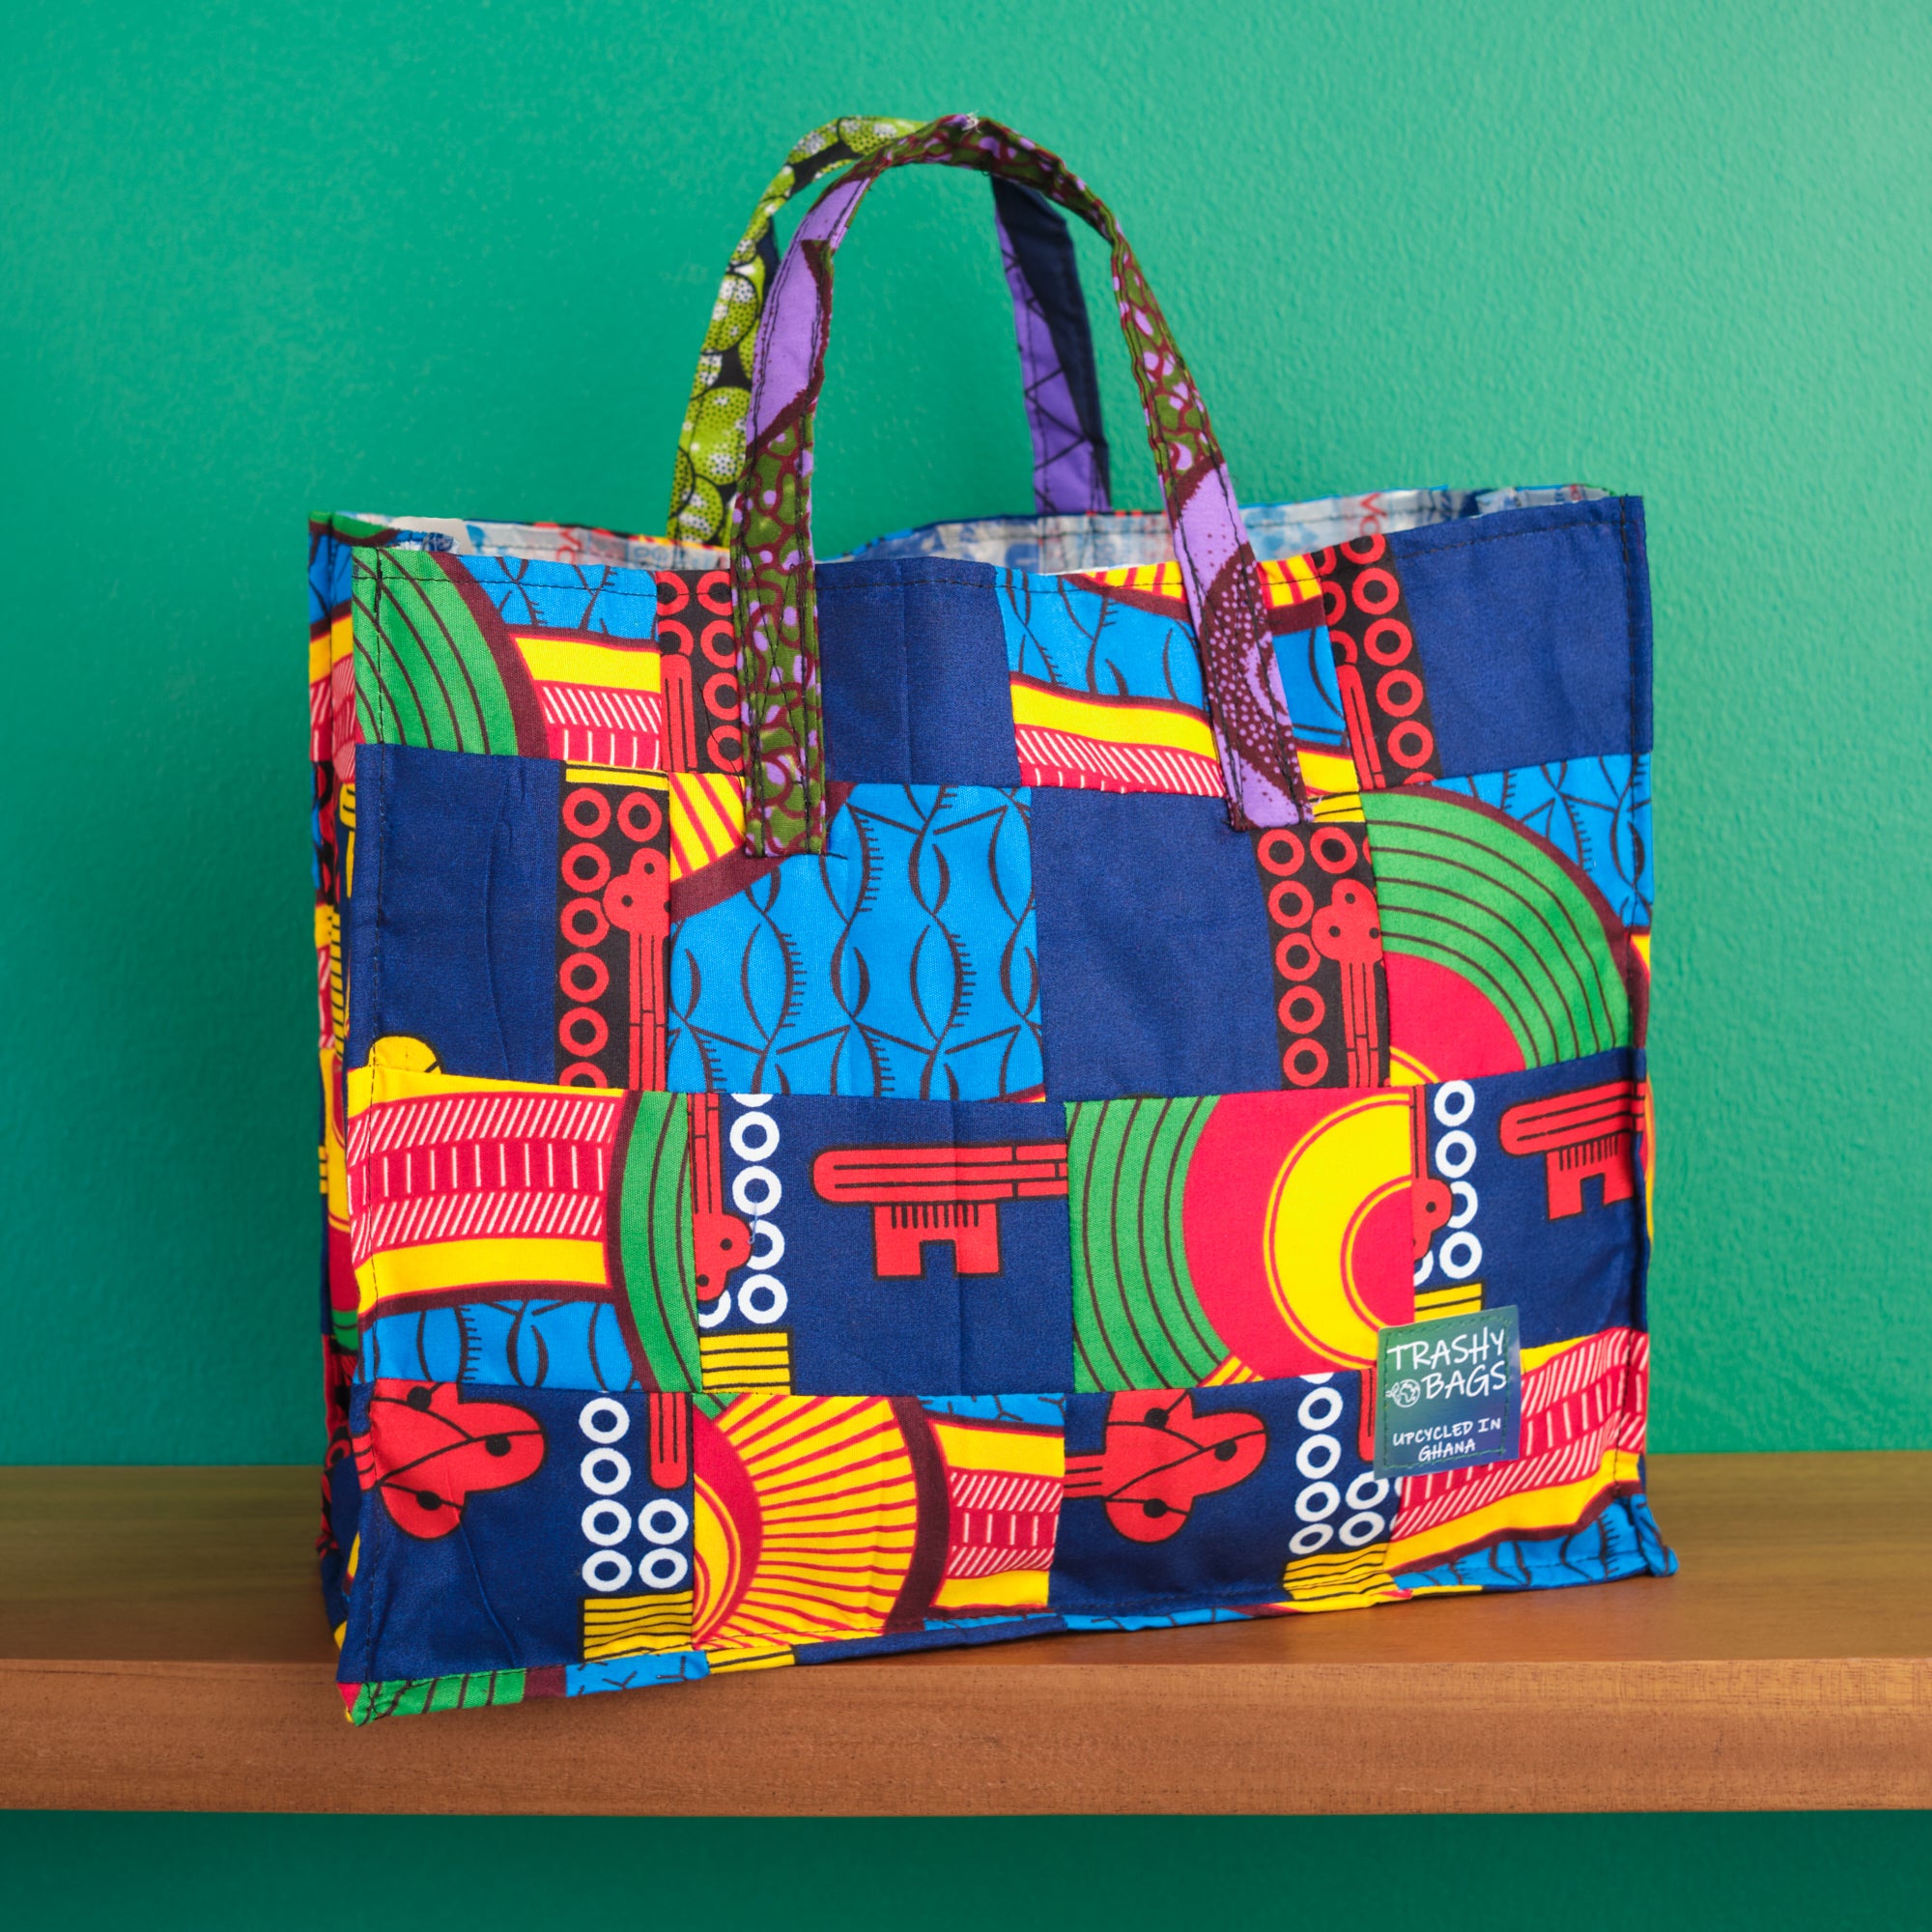 Trashy Bags Africa Recycled Fabric Tote Shopper Bag